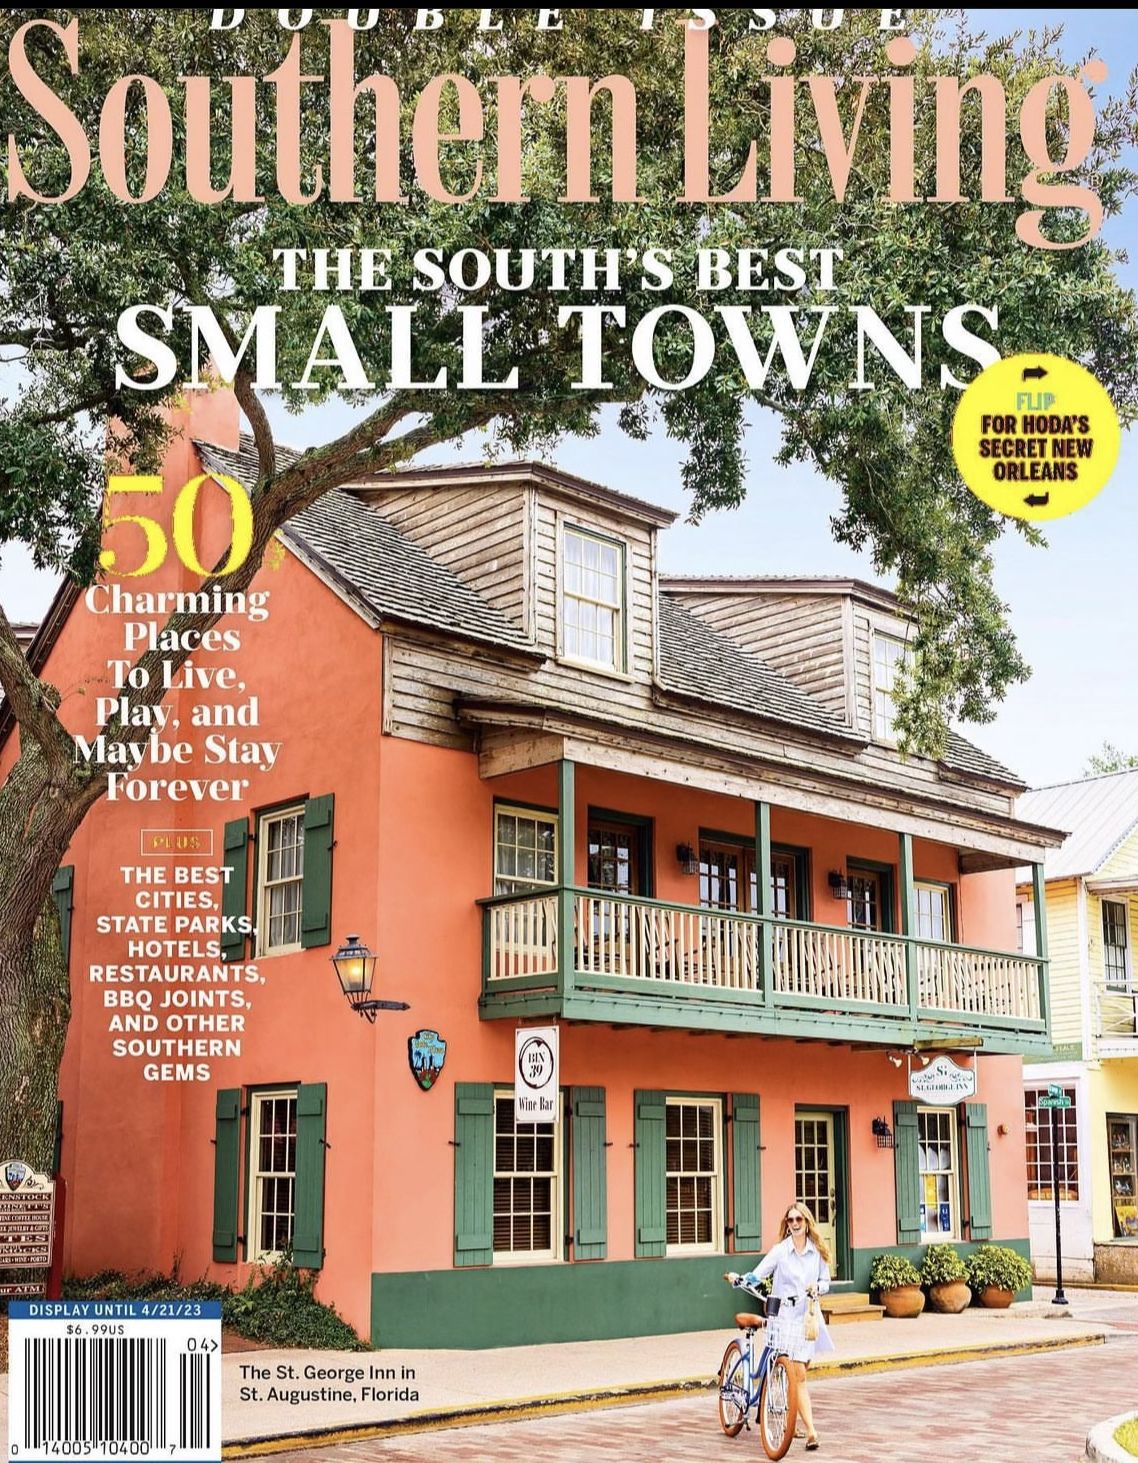 The South's Best Small Towns